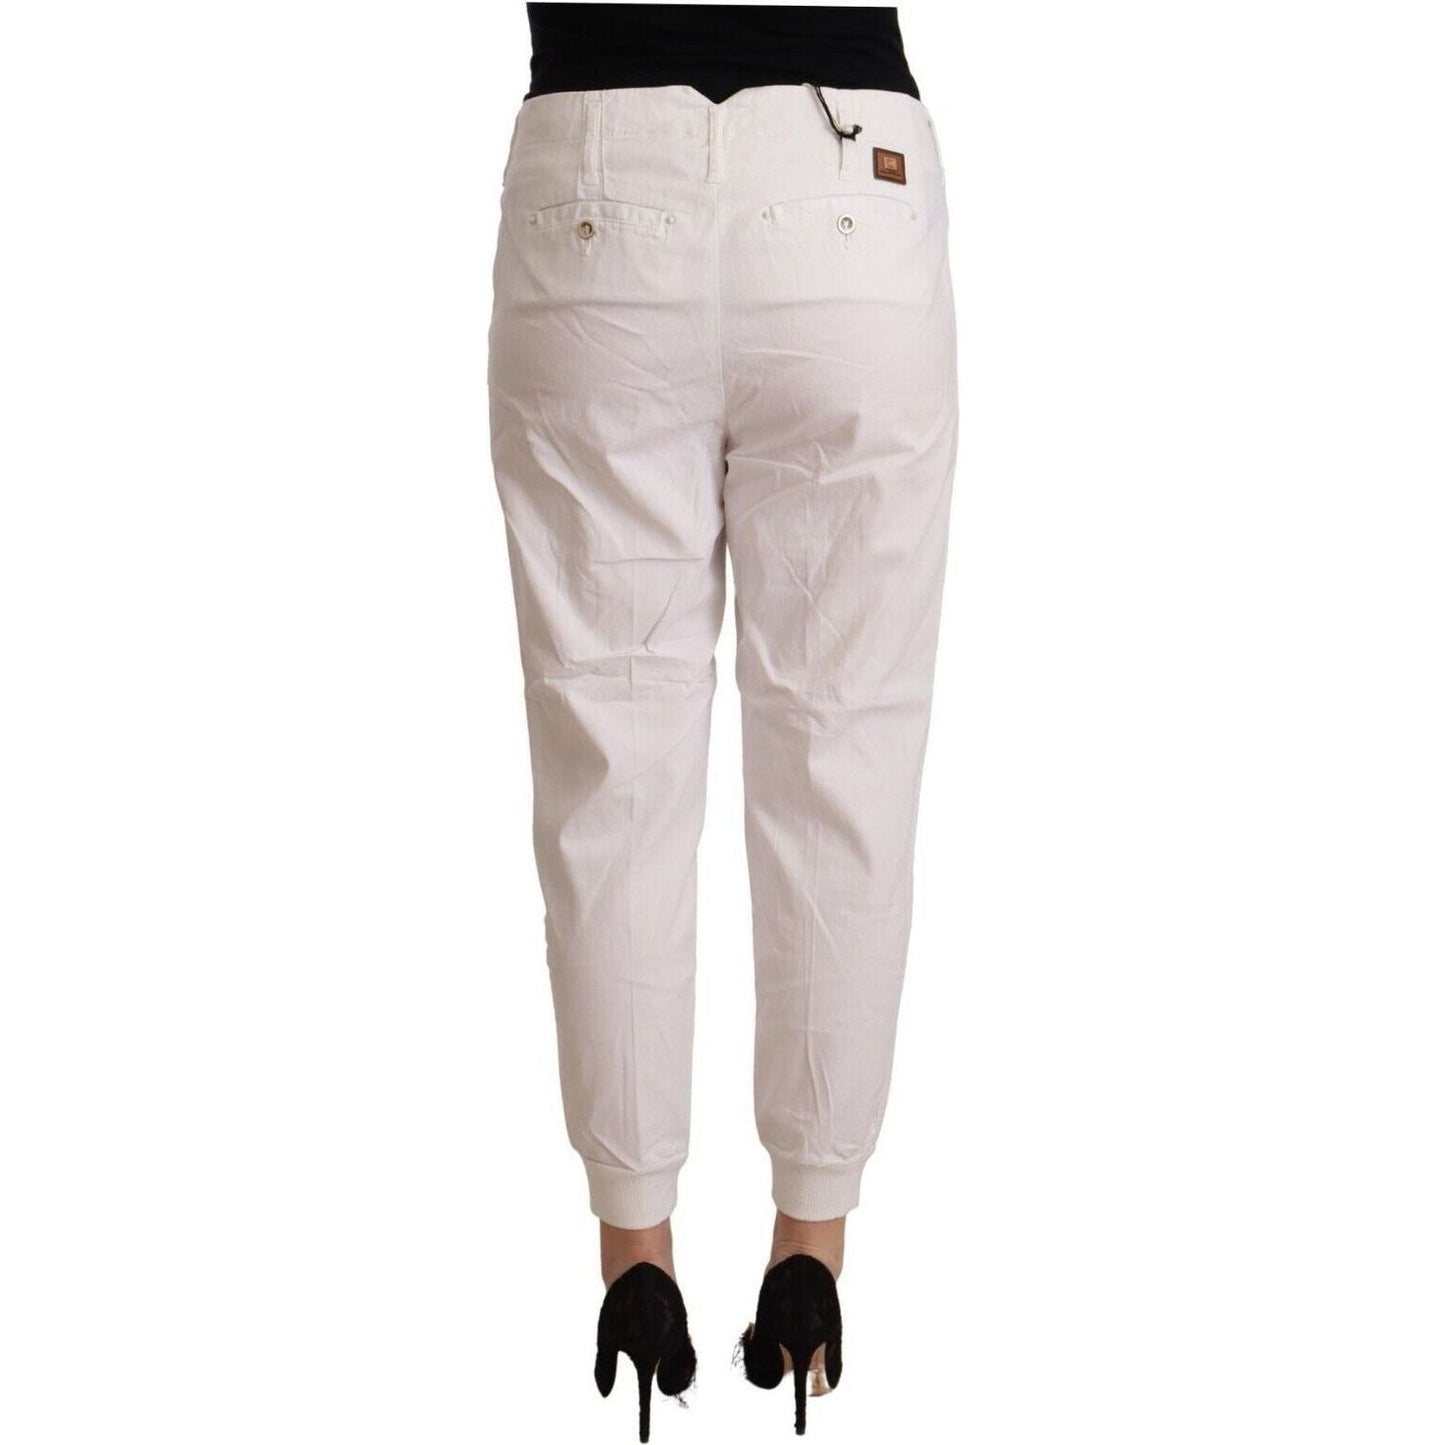 Met Chic White Tapered Cropped Pants white-cotton-mid-waist-tapered-cropped-pants